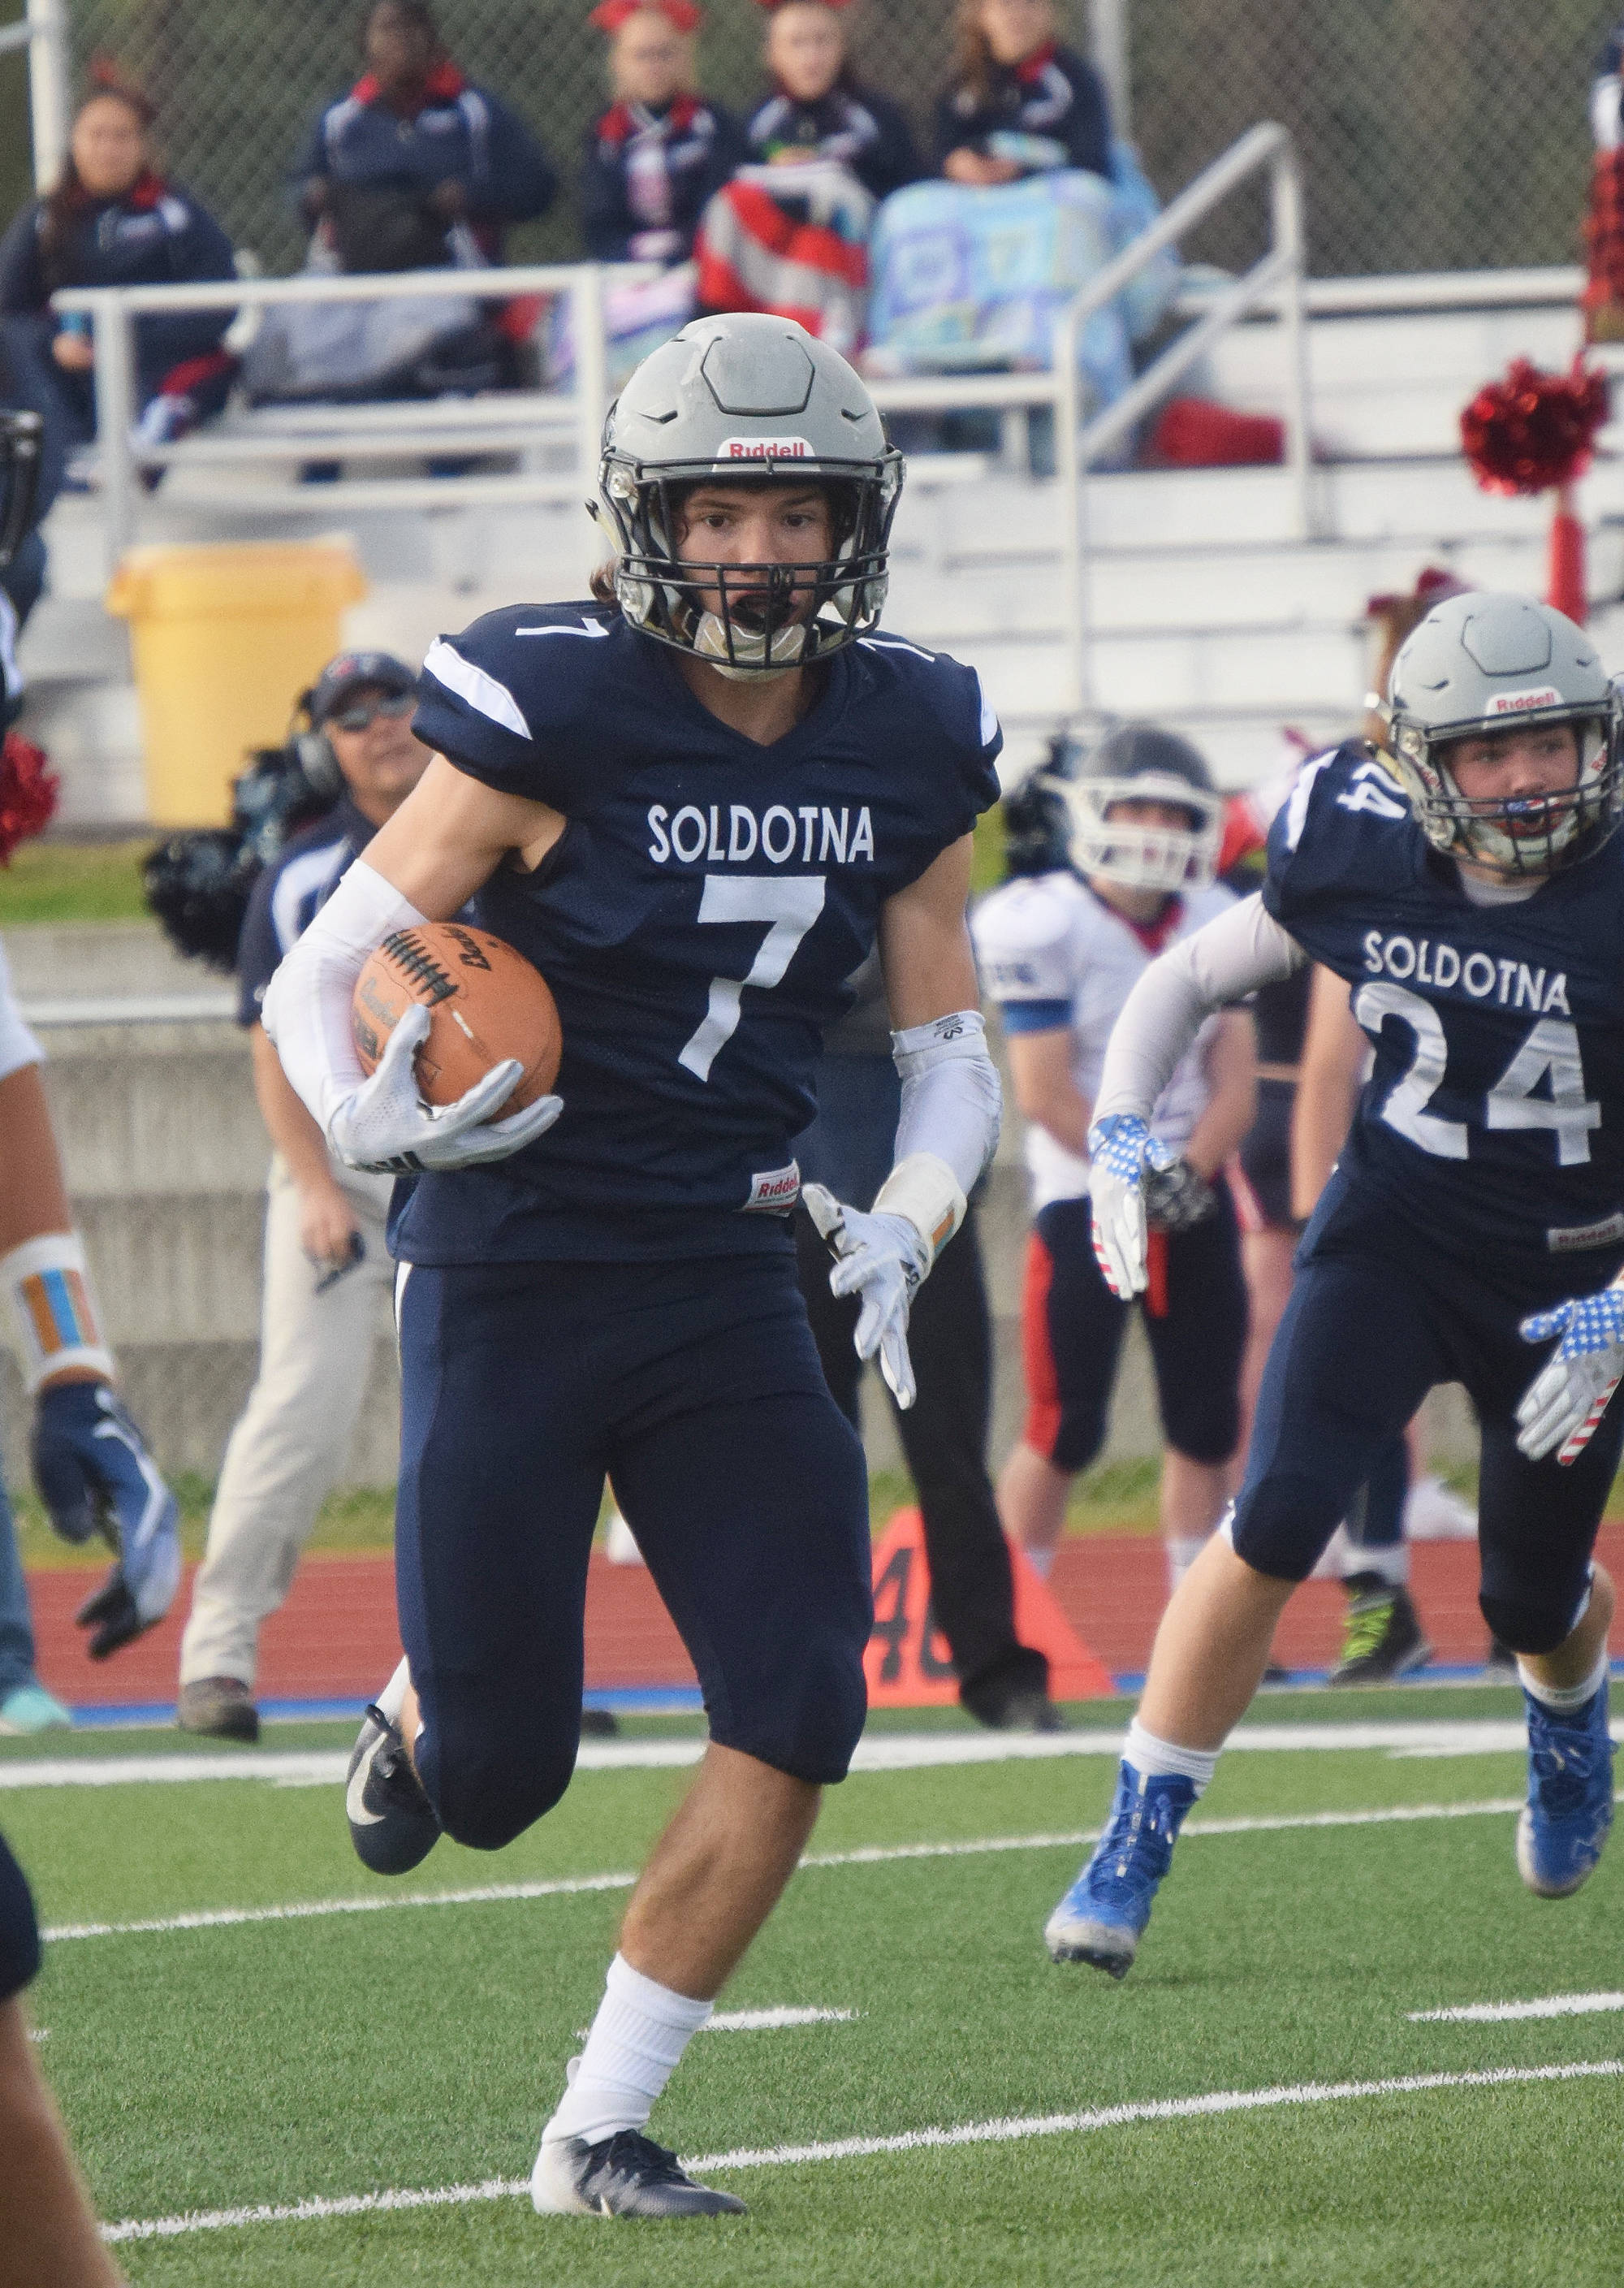 Soldotna junior Wyatt Medcoff looks for room to run after grabbing an interception Friday against North Pole at Soldotna’s Justin Maile Field. (Photo by Joey Klecka/Peninsula Clarion)